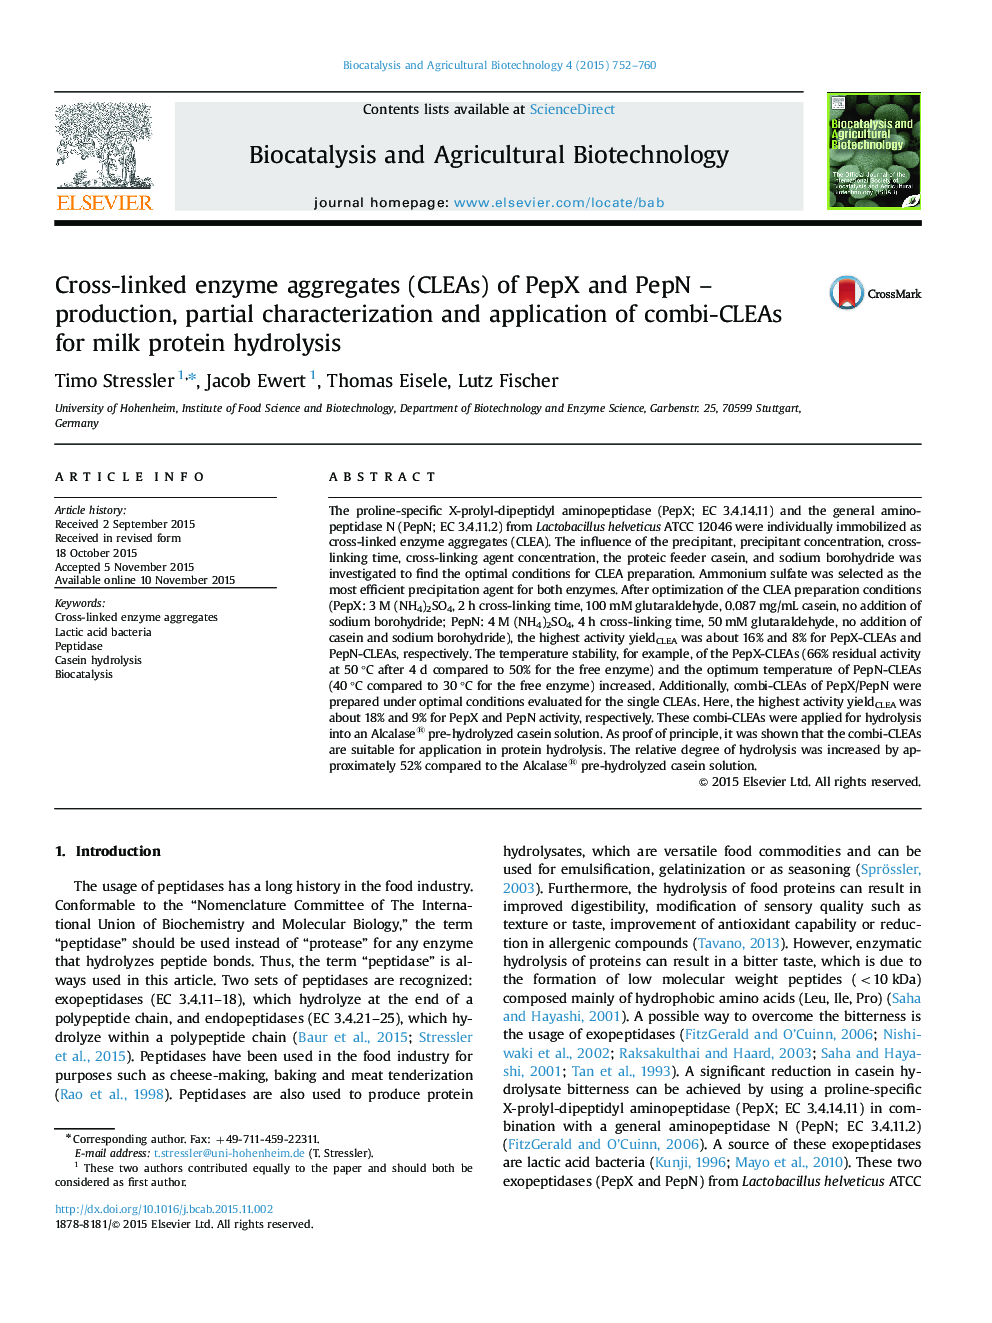 Cross-linked enzyme aggregates (CLEAs) of PepX and PepN – production, partial characterization and application of combi-CLEAs for milk protein hydrolysis